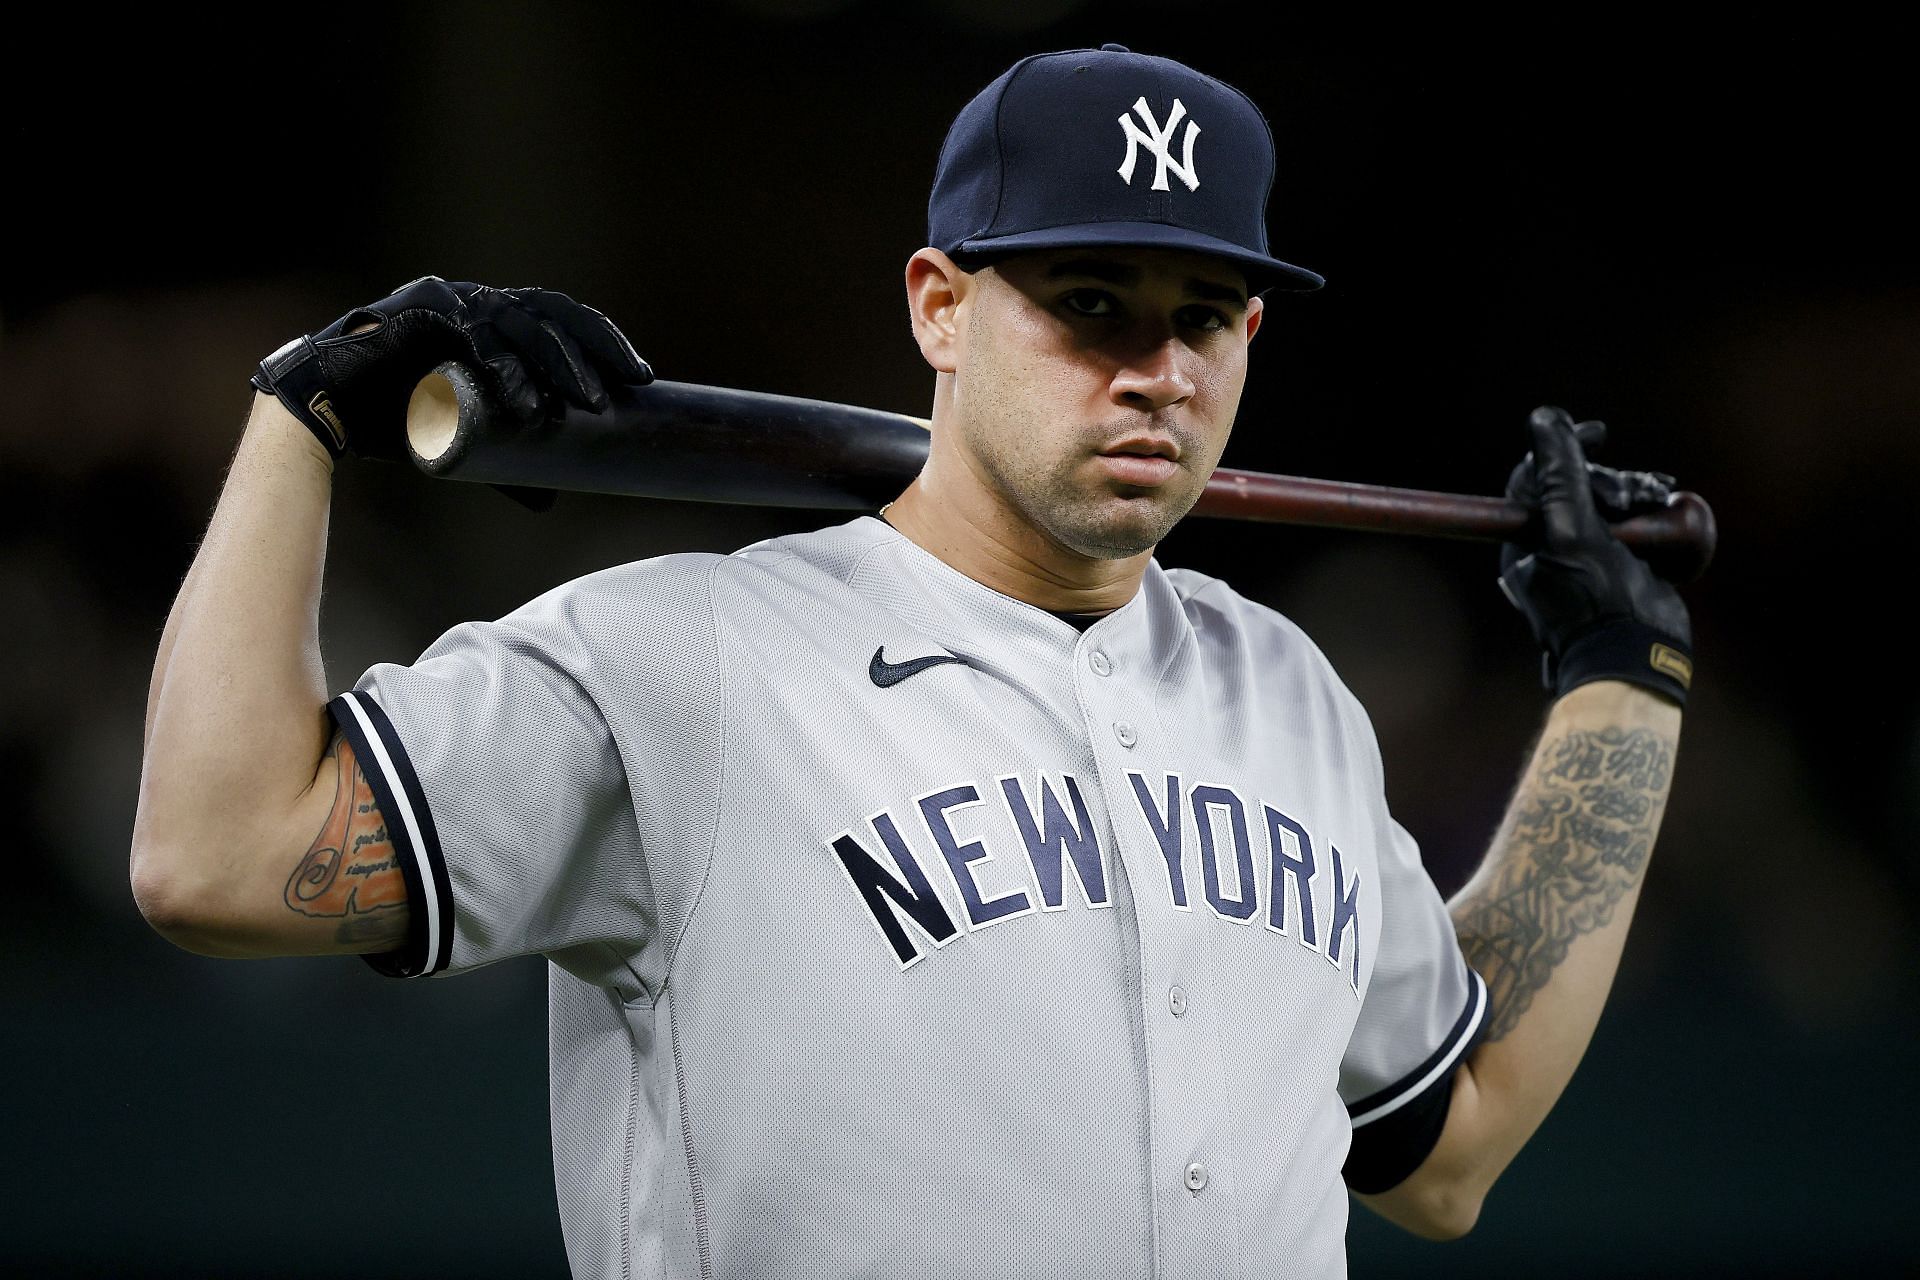 Yankees catcher not worried about potential Gary Sanchez awkwardness